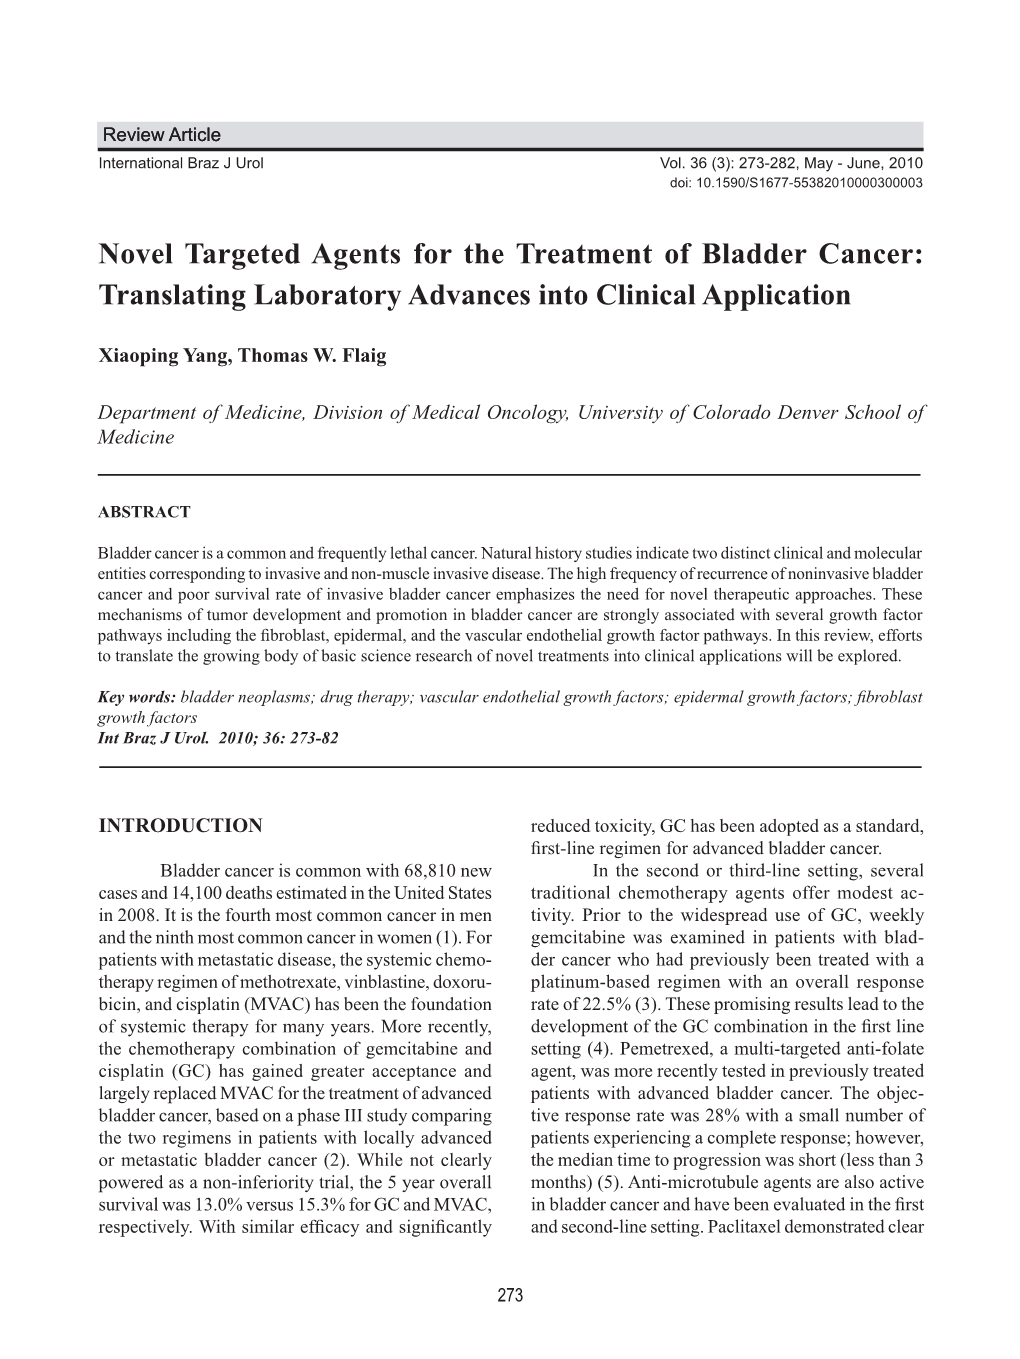 Novel Targeted Agents for the Treatment of Bladder Cancer: Translating Laboratory Advances Into Clinical Application